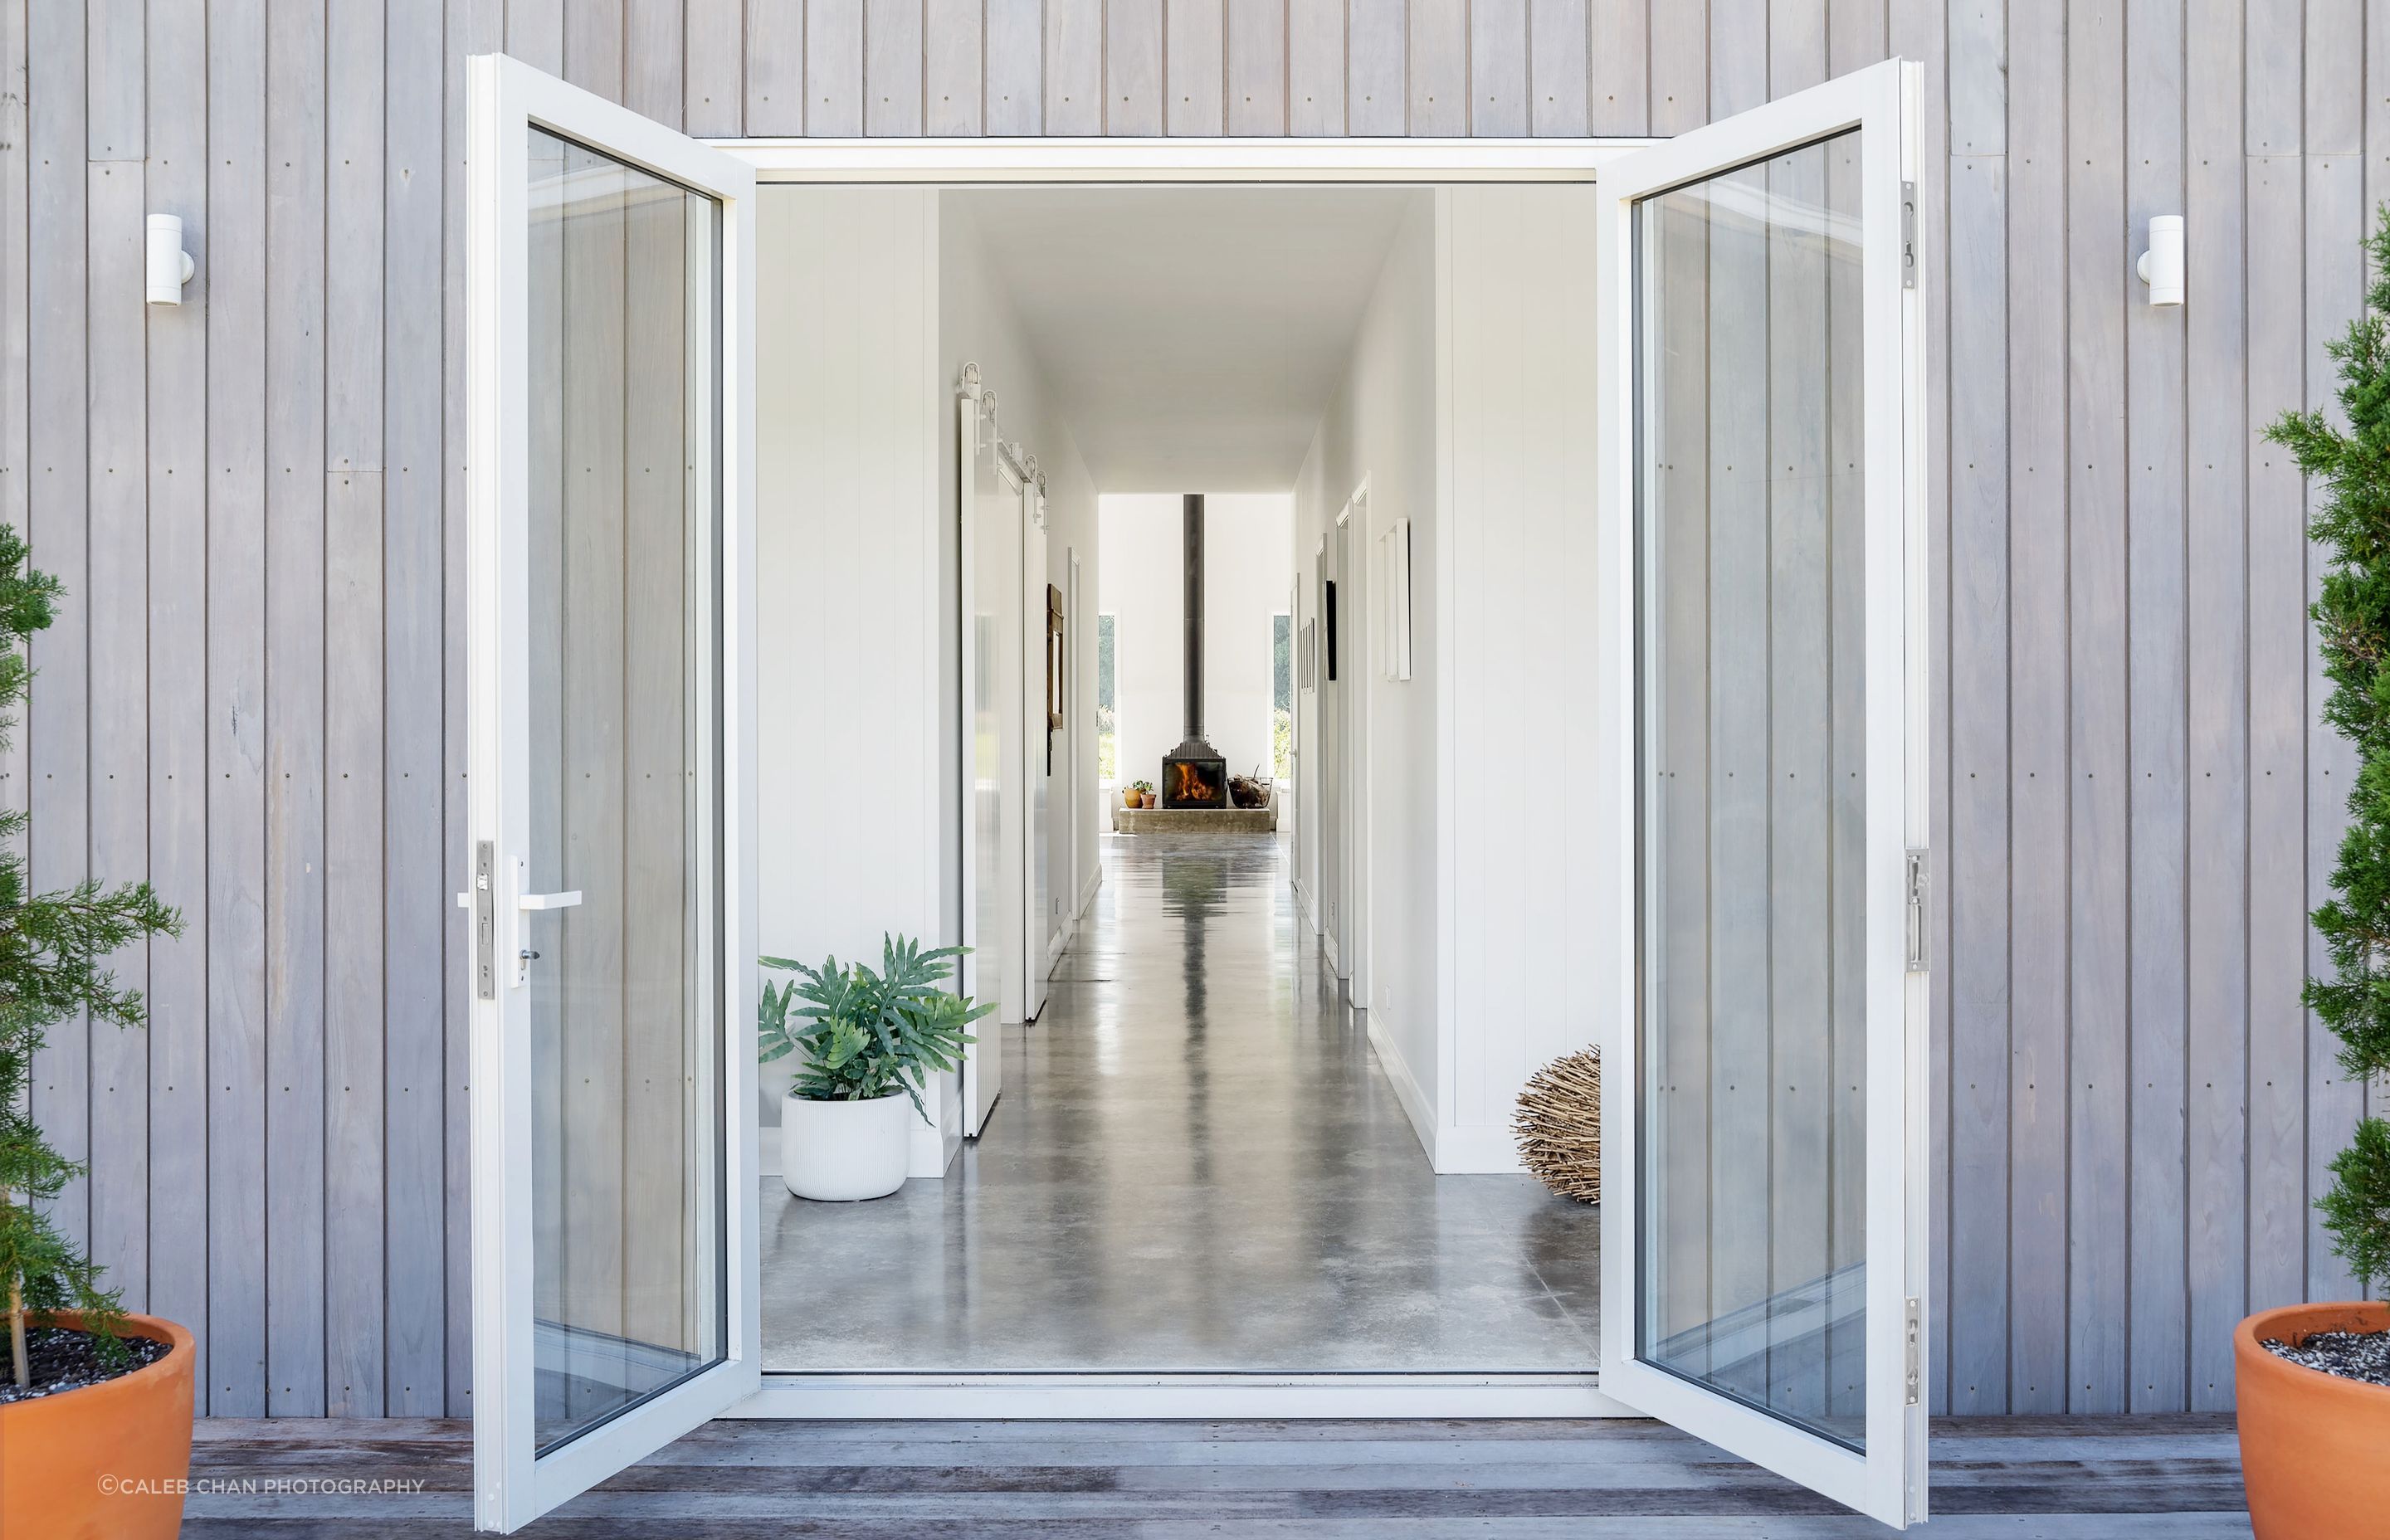 The glass front French doors provide a glimpse of the grand living space upon entering the home.